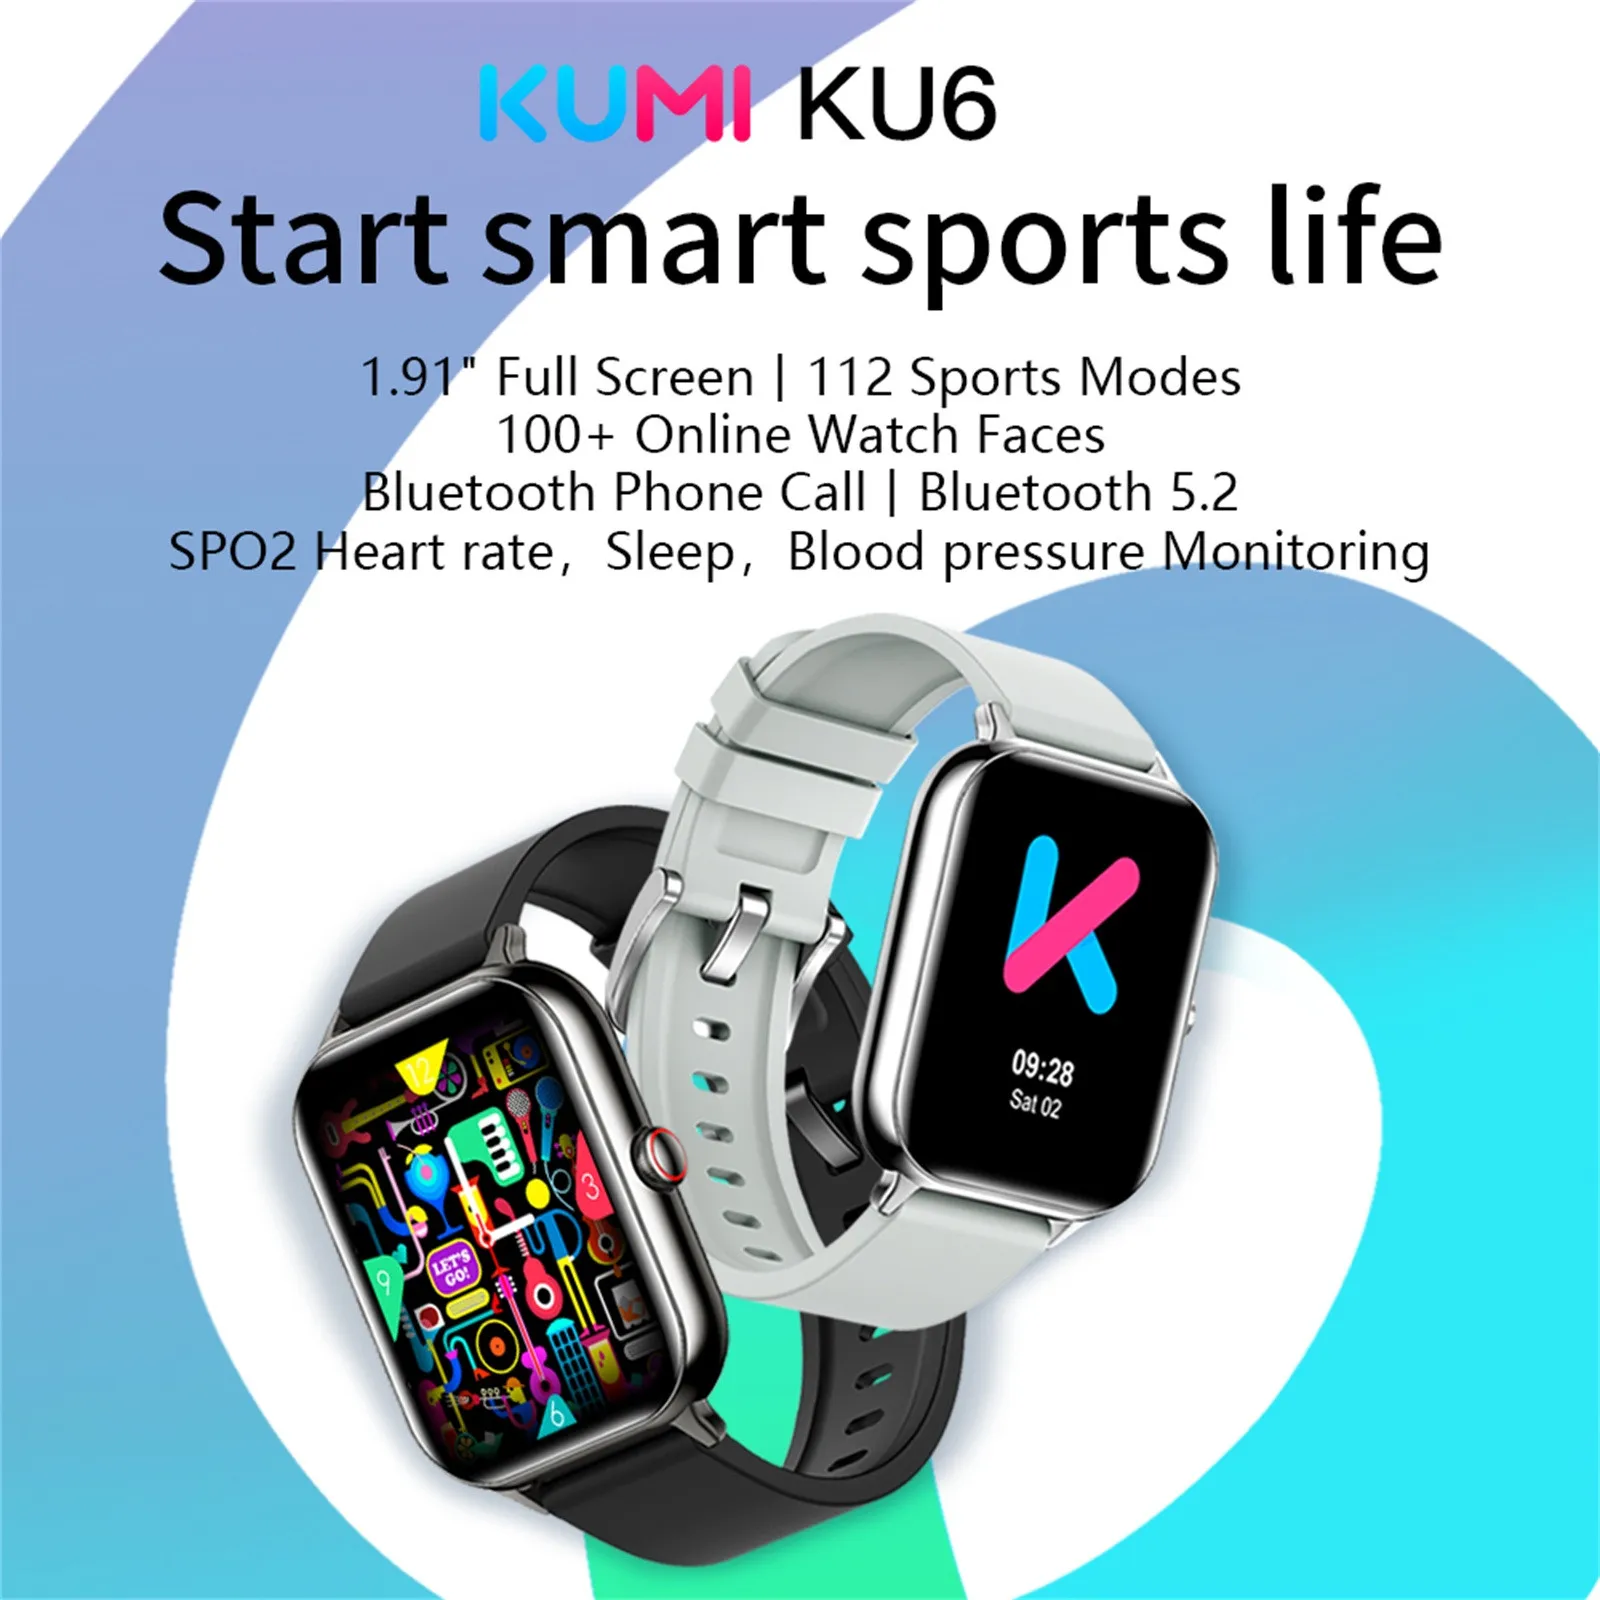 

Kumi Ku6 Smartwatch 1.91inch Full Screen For Android Phones, Ip68 Waterproof Smart Watches Heart Rate, Blood Oxygen, Fitness